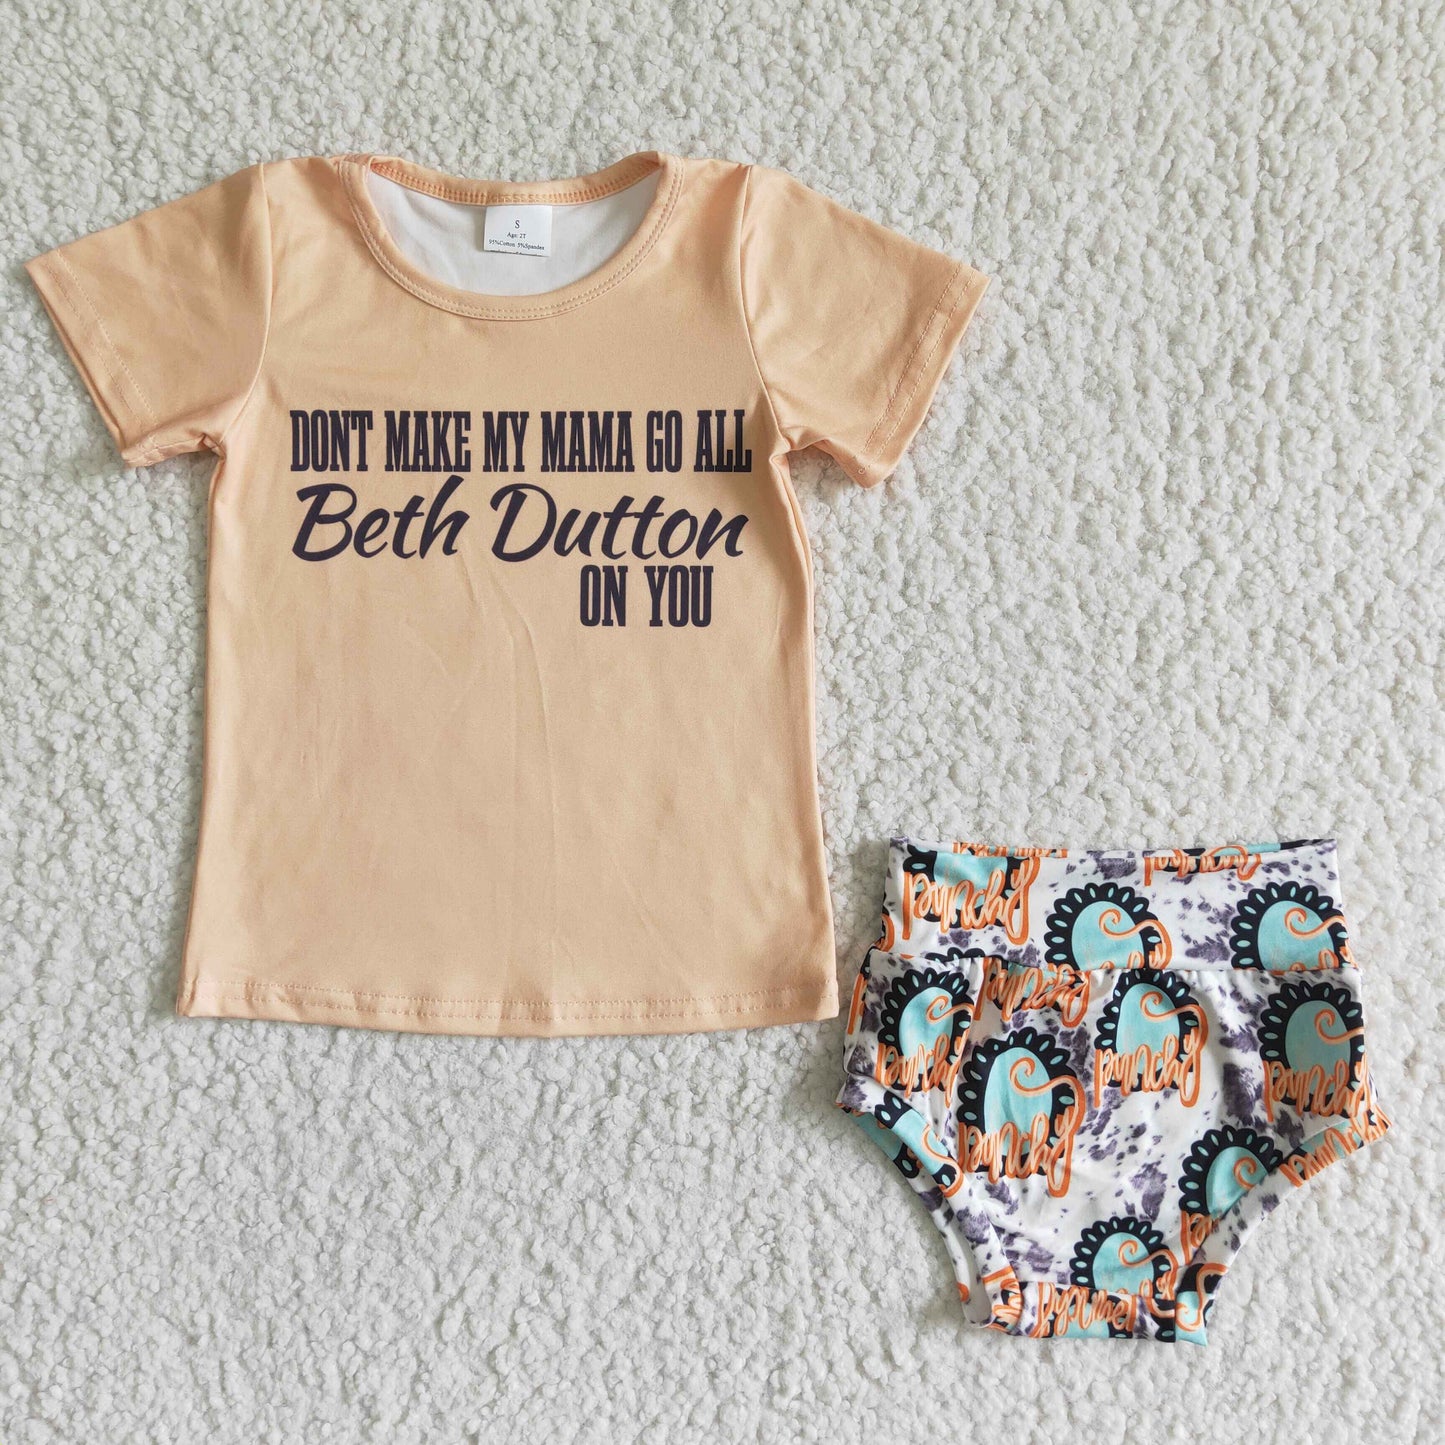 (Promotion)Don't make my mama go all beth dutton on you bummie outfits GBO0006